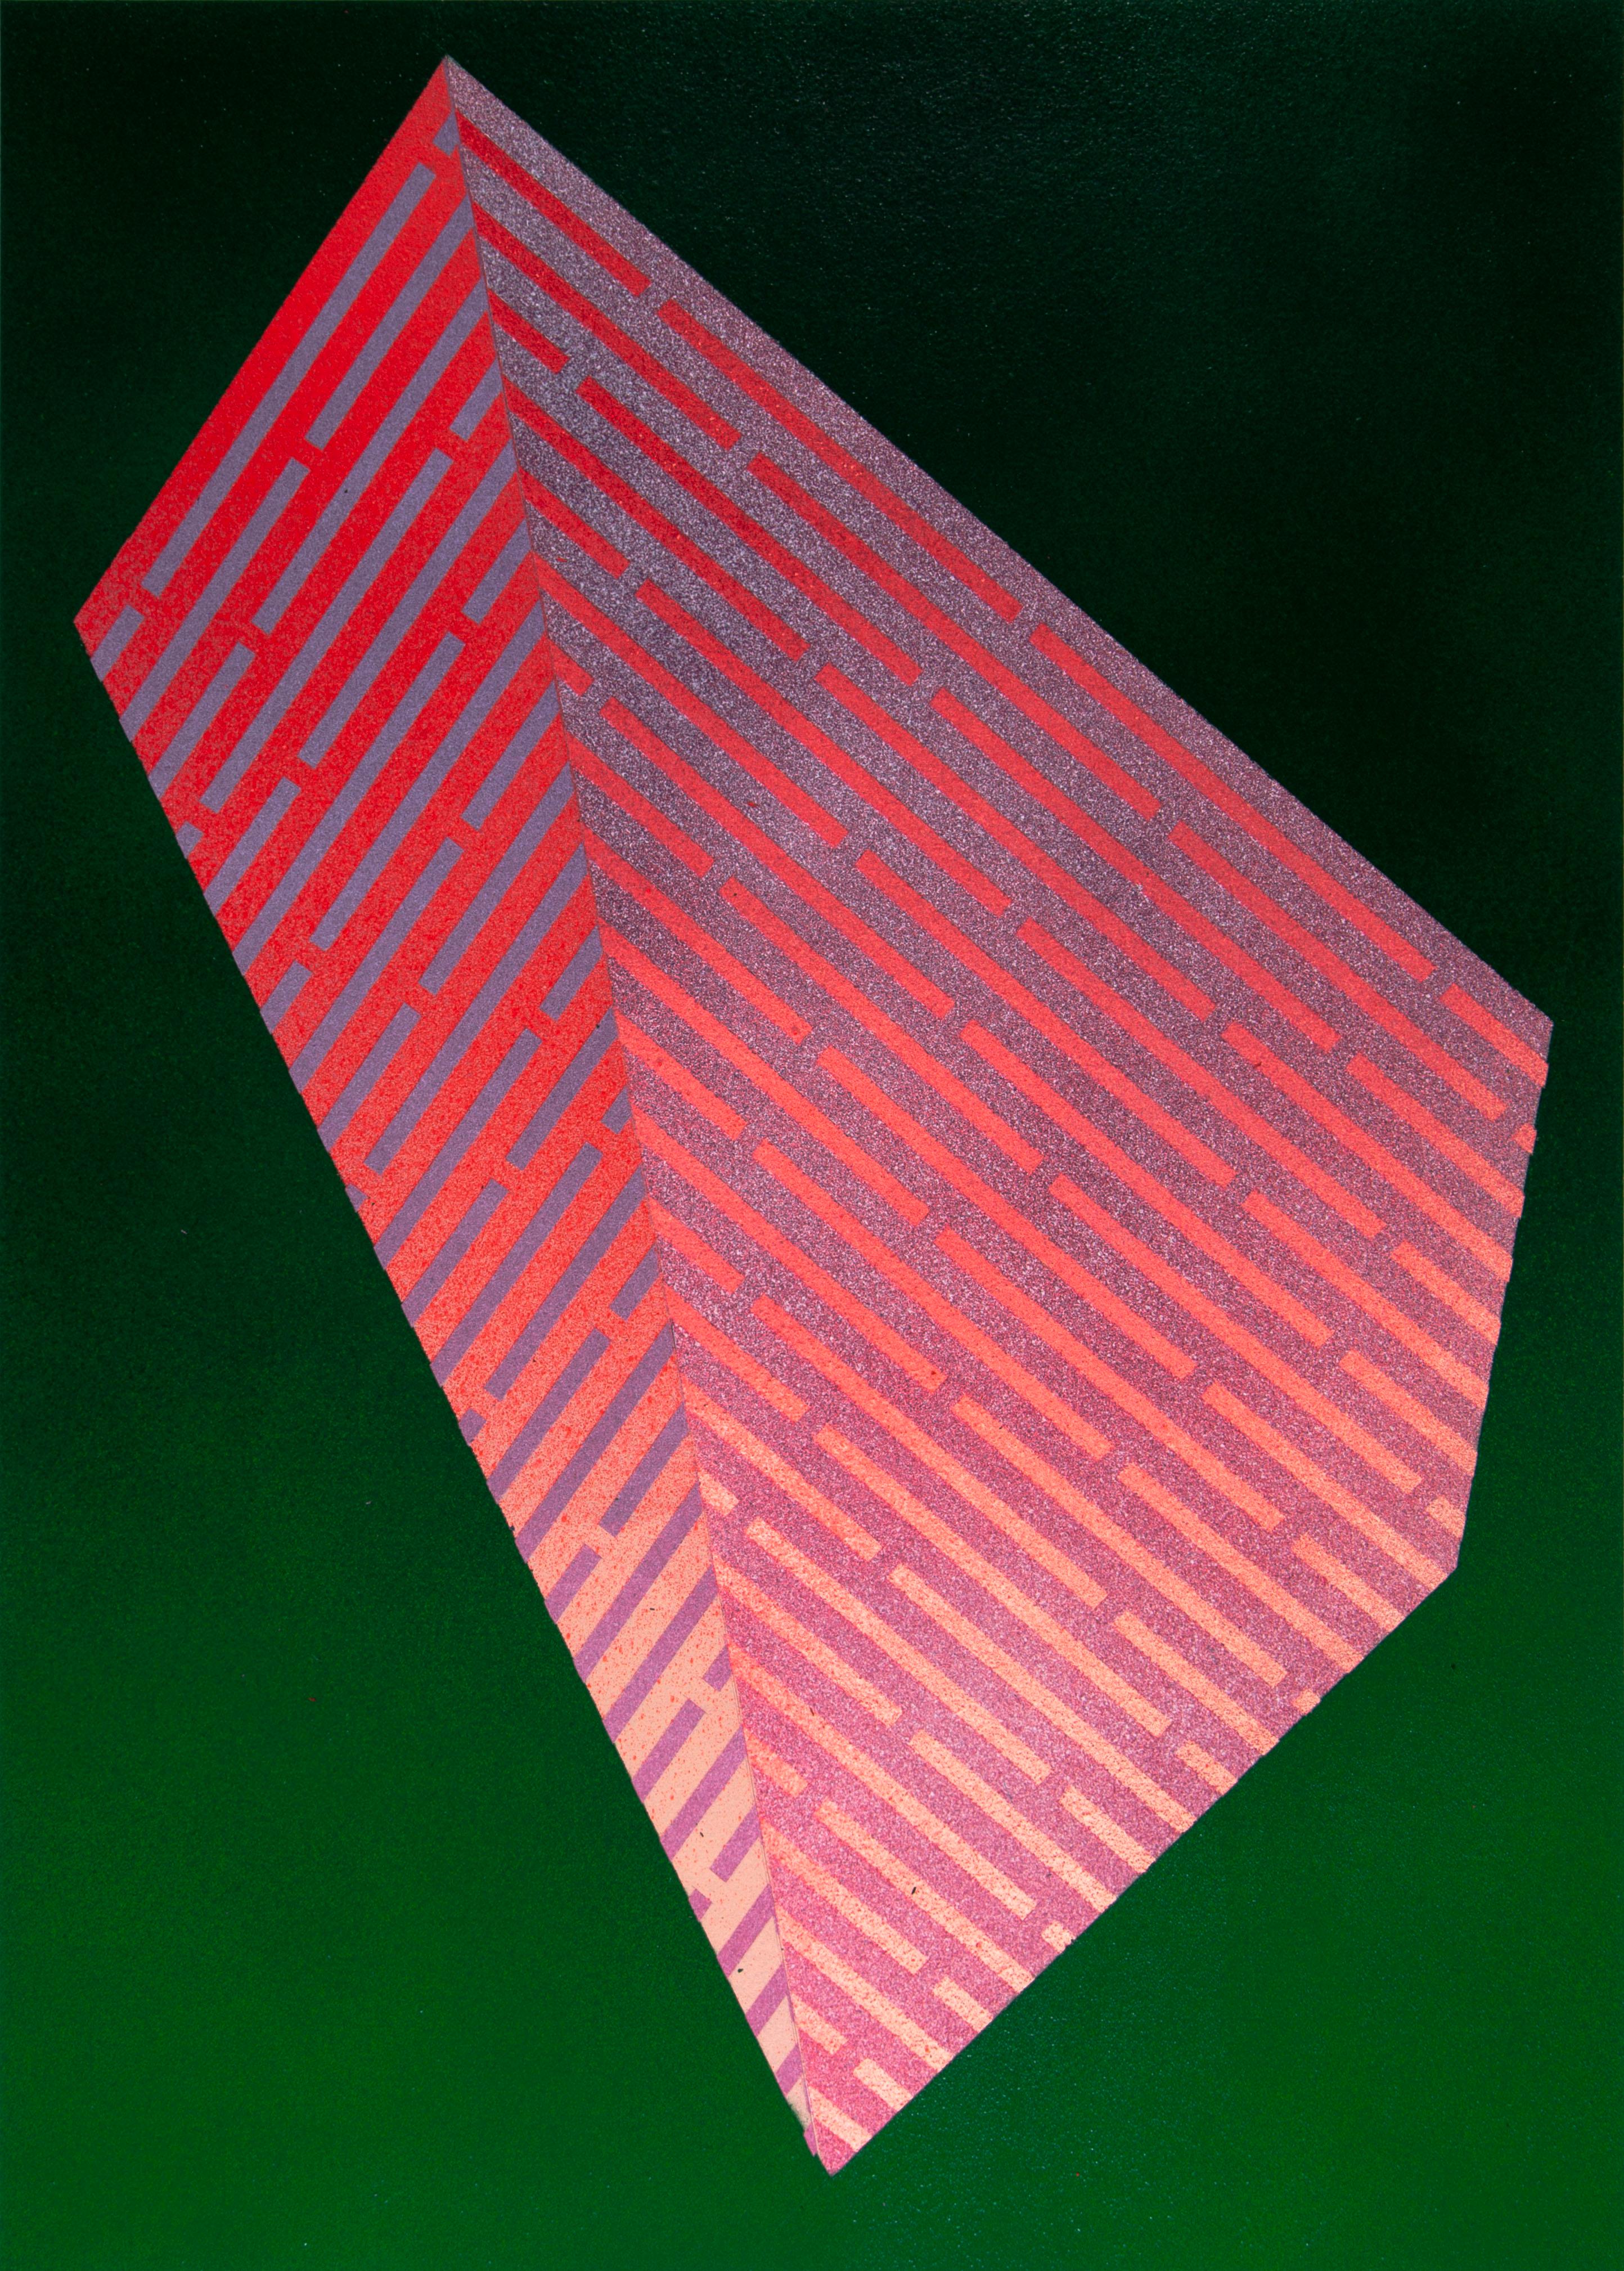 Luminescent Polygon XIII: geometric abstract painting; pink & green line pattern